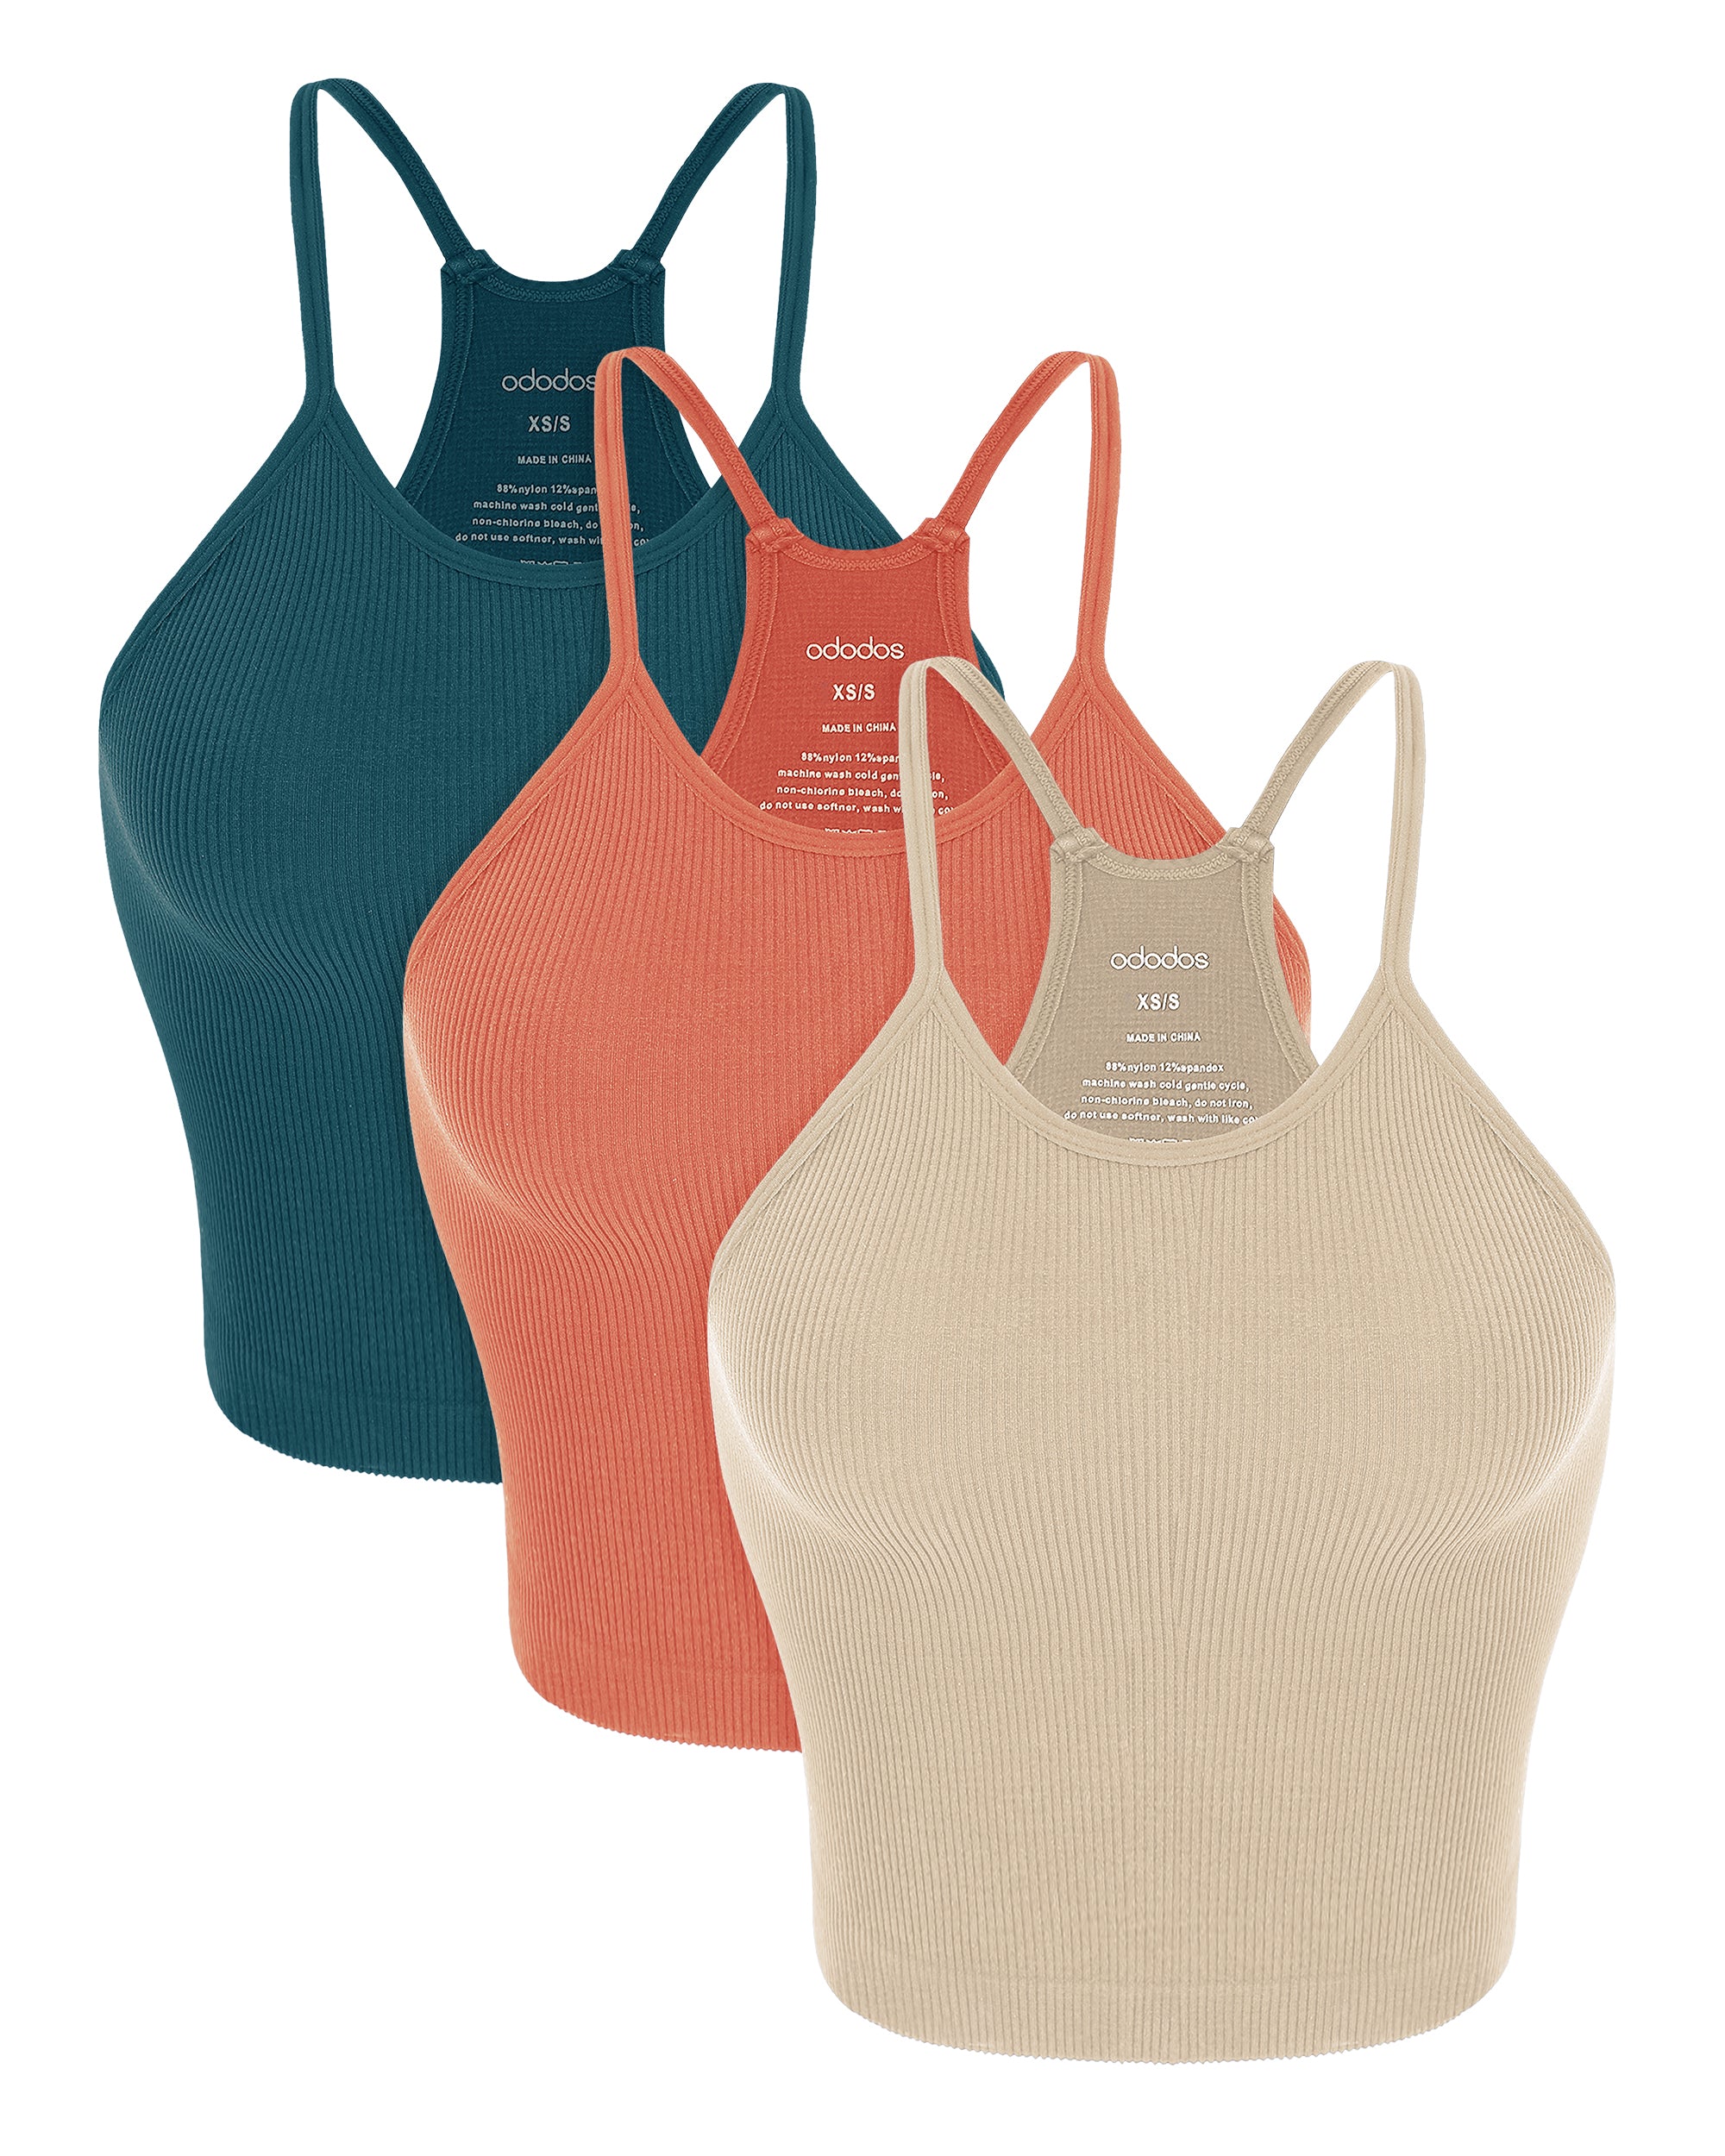 3-Pack Seamless Rib-Knit Camisole Beige+Coral+Teal - ododos